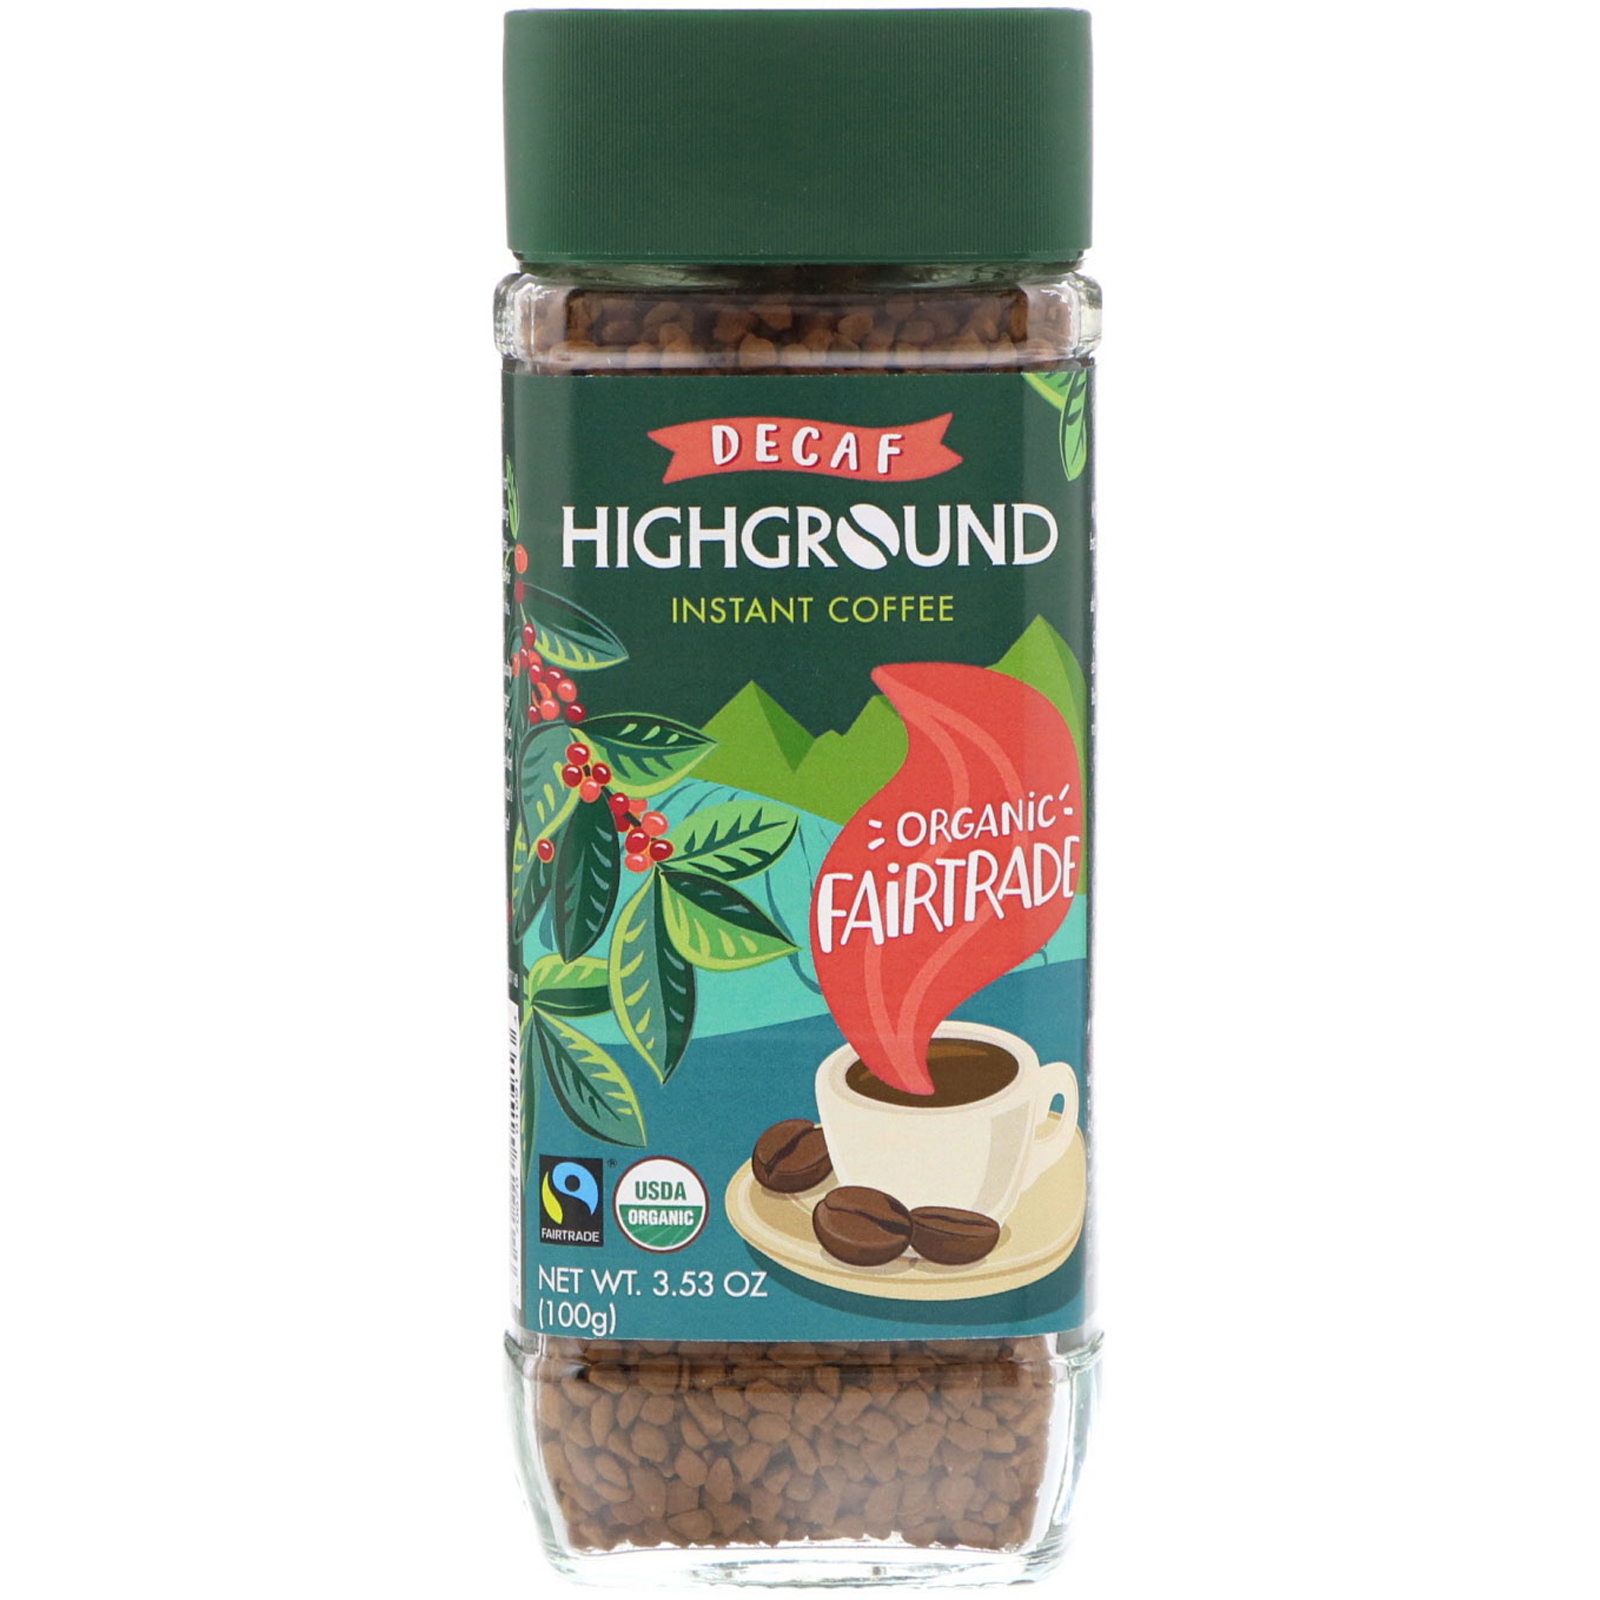 Whats The Best Decaf Instant Coffee / Best Instant Decaf